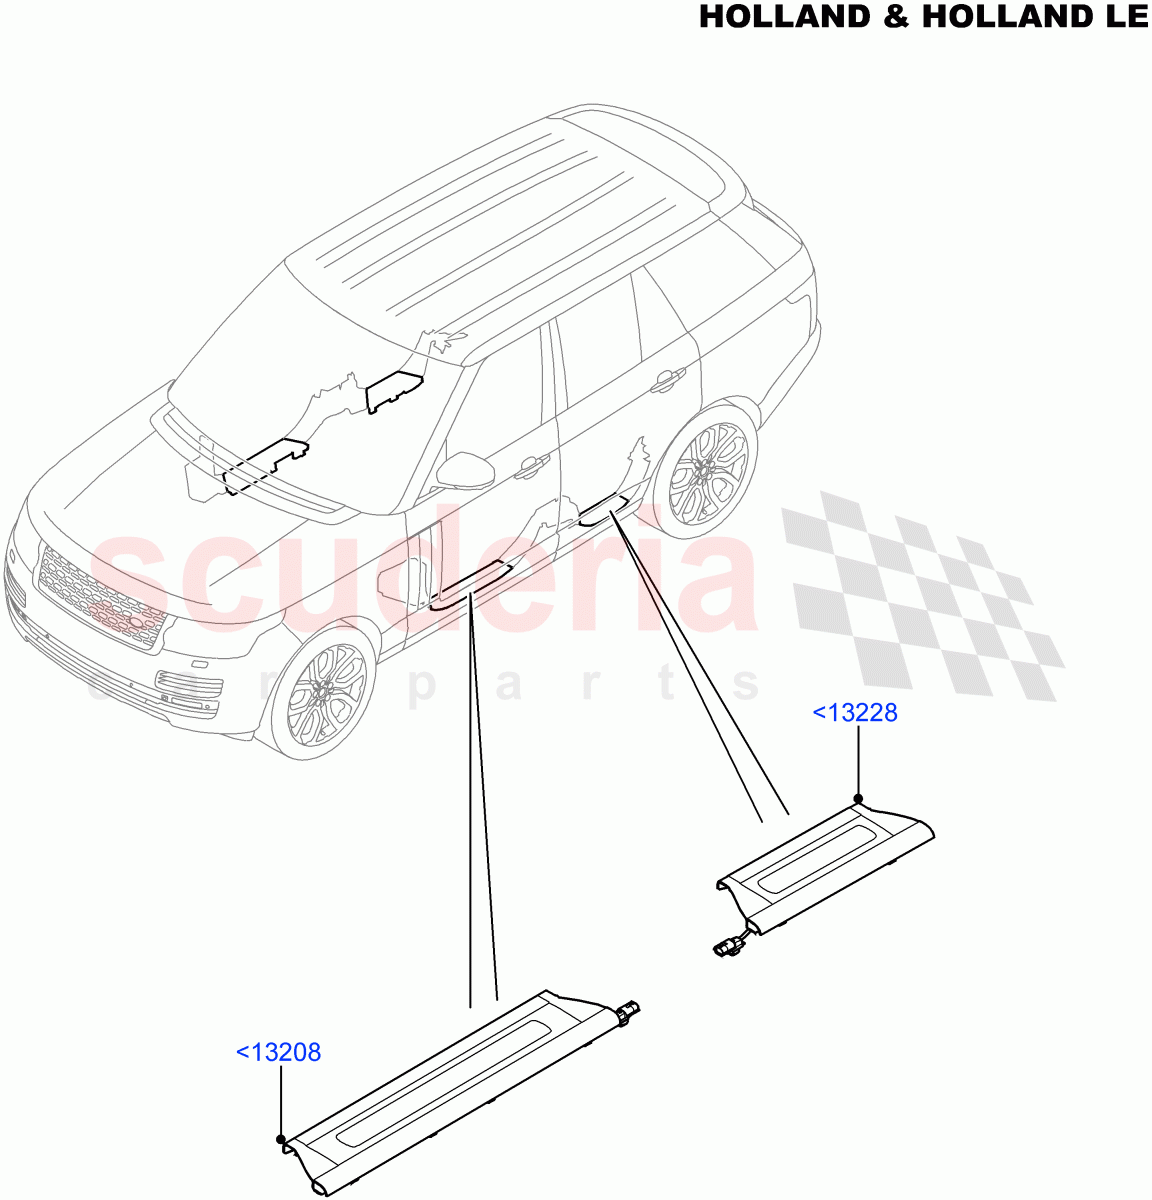 Side Trim(Holland & Holland LE, Sill)(Console Deployable Tables)((V)FROMFA000001) of Land Rover Land Rover Range Rover (2012-2021) [2.0 Turbo Petrol AJ200P]